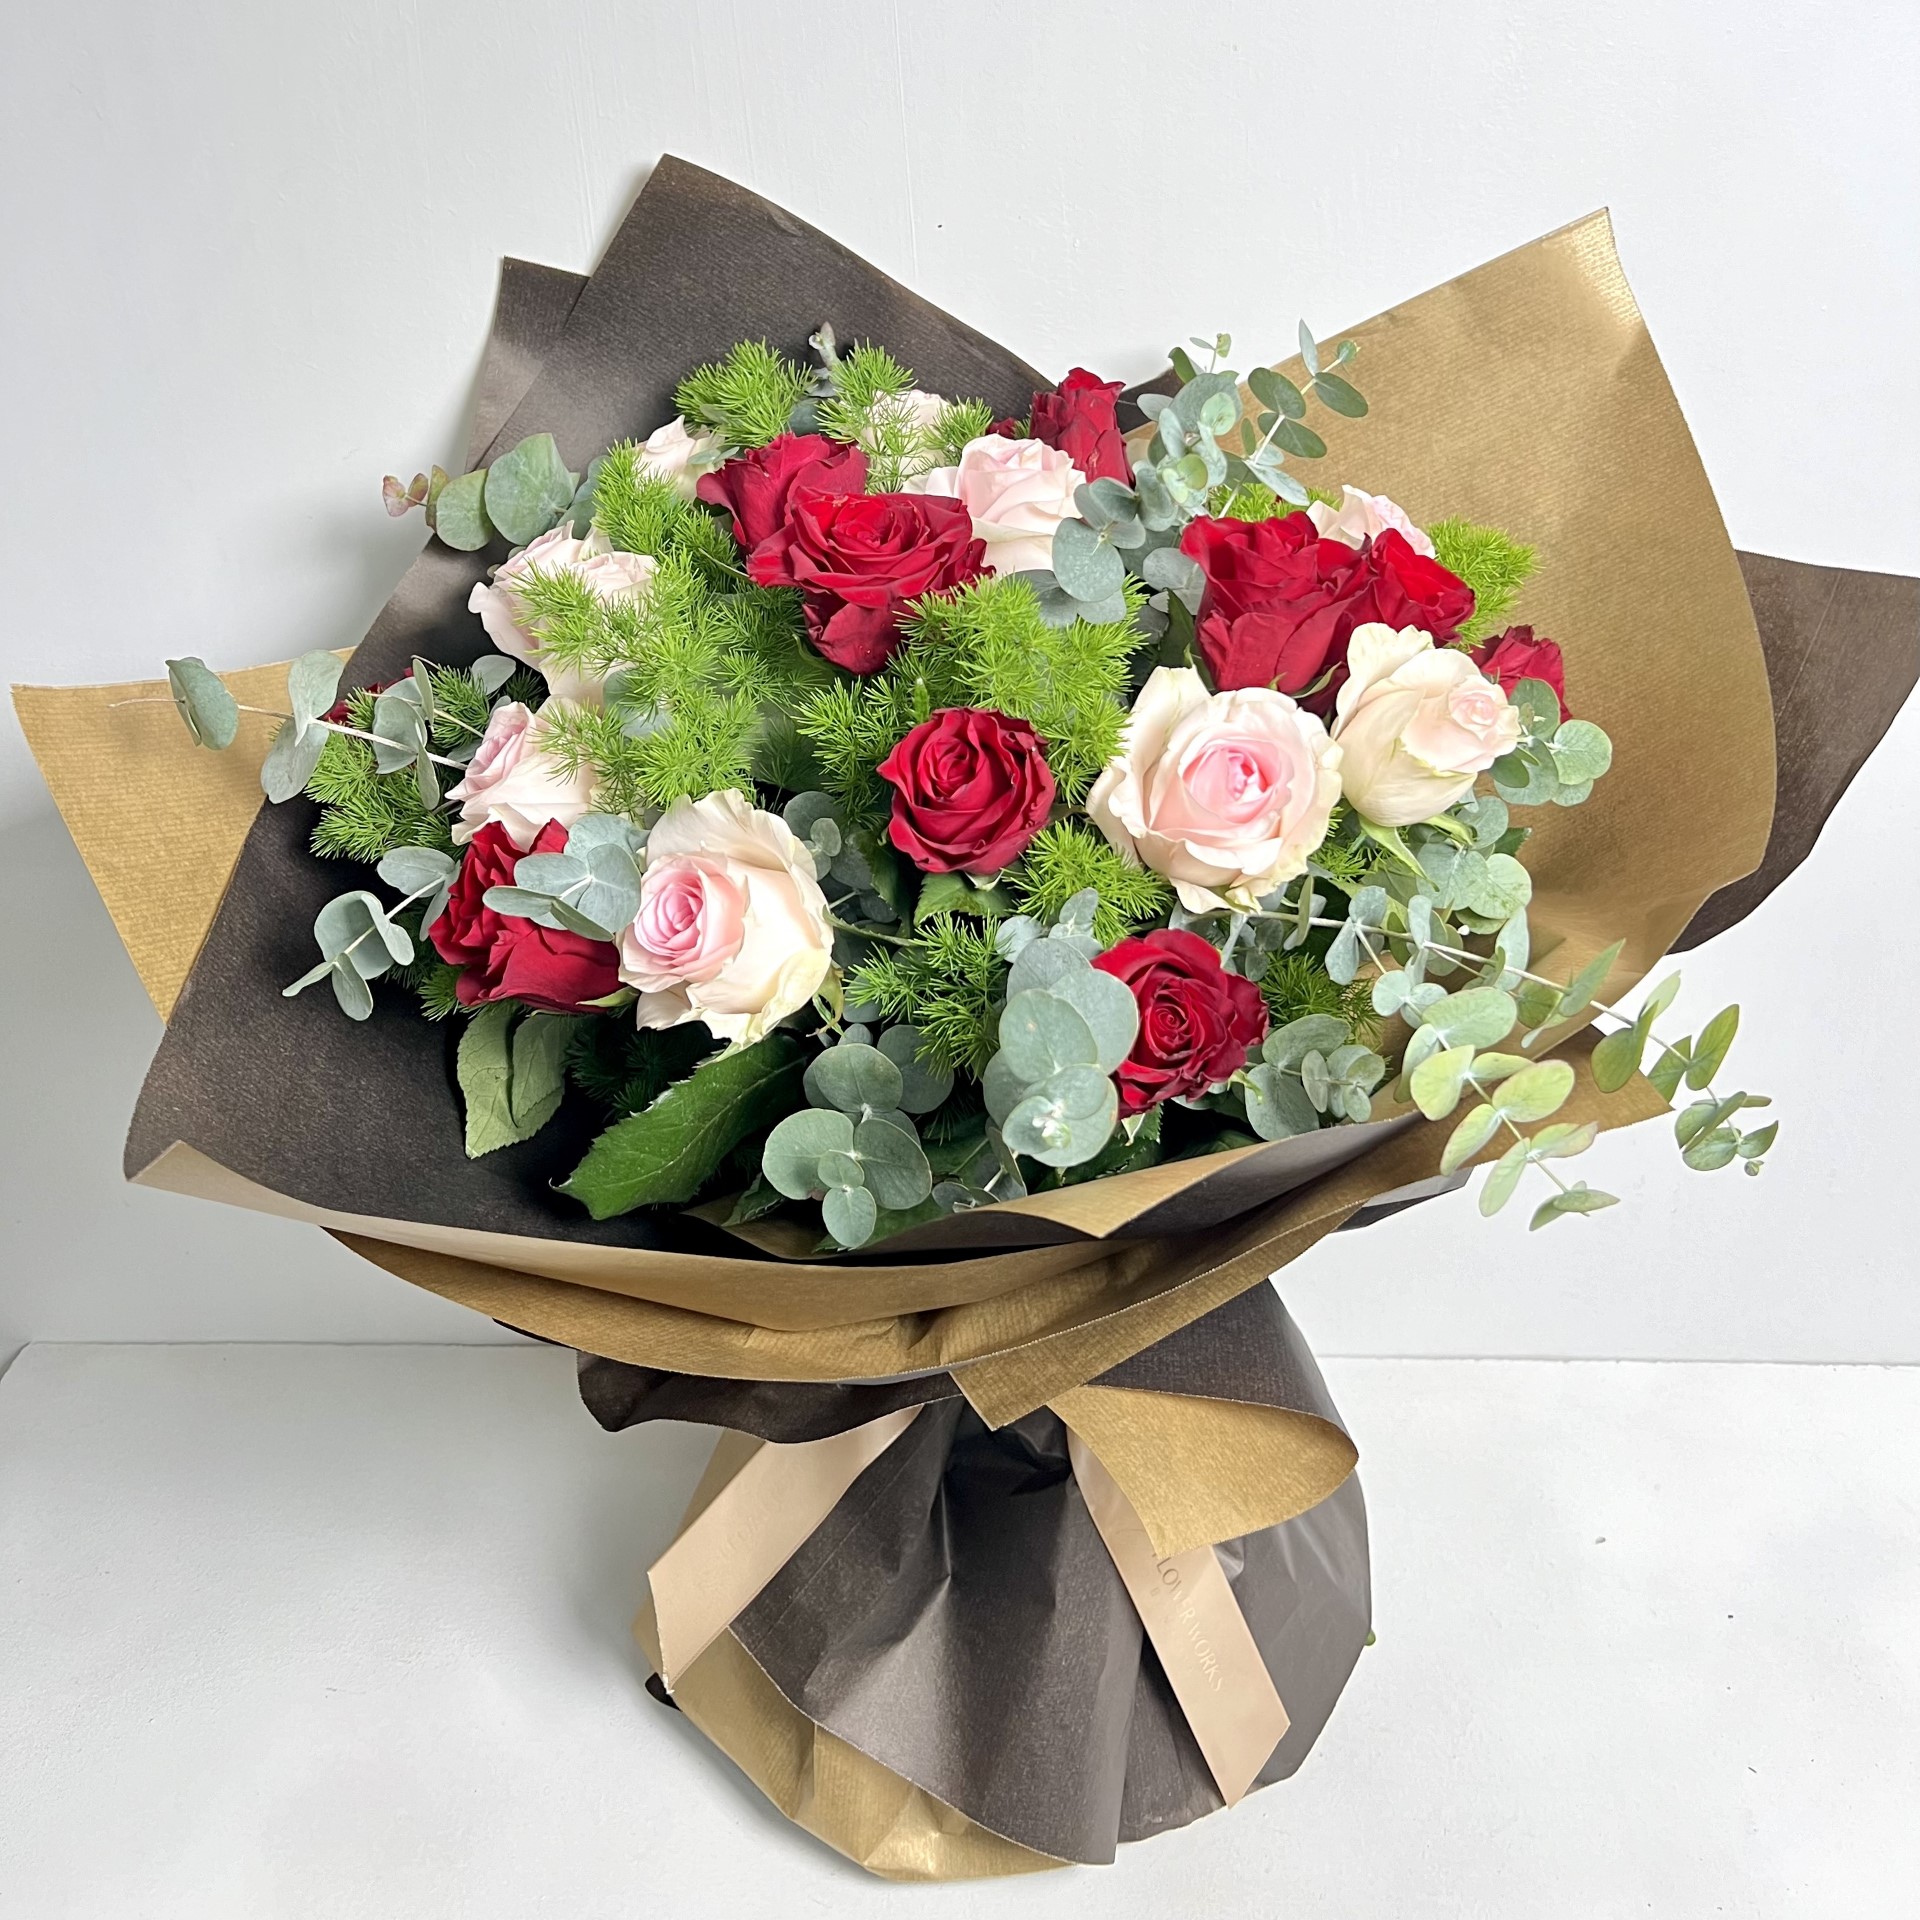 21 PINK AND RED ROSES BOUQUET AND GREENERY